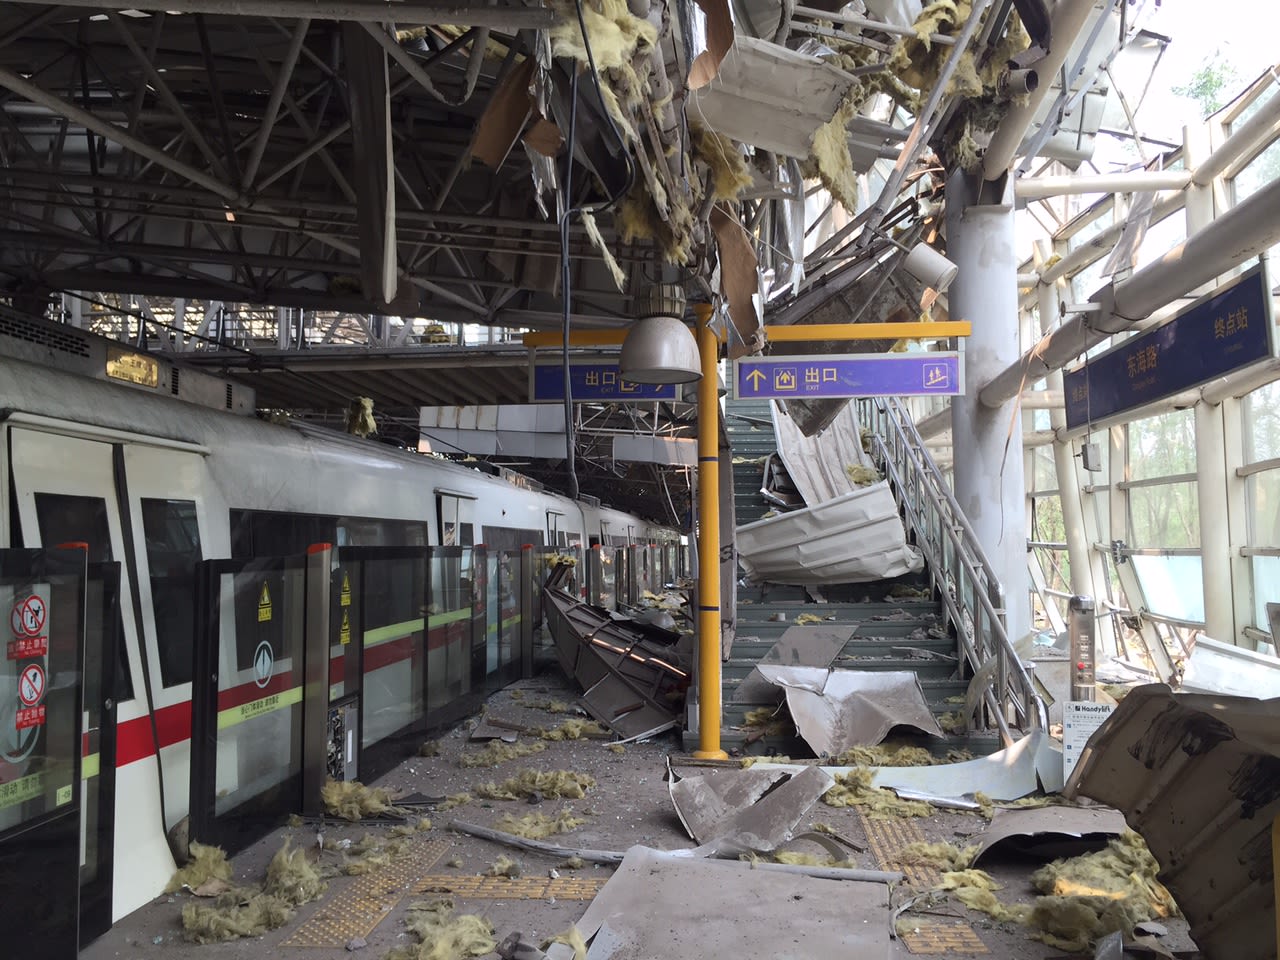 The Donghai Road light rail terminal station in Tianjin, China, is seen covered in debris on Monday, August 17.  Explosions at a chemical warehouse left more than a hundred people dead and hundreds injured. Fire officials say hazardous chemicals stored at the warehouse were ignited by fire, but the fire's cause is still being investigated.